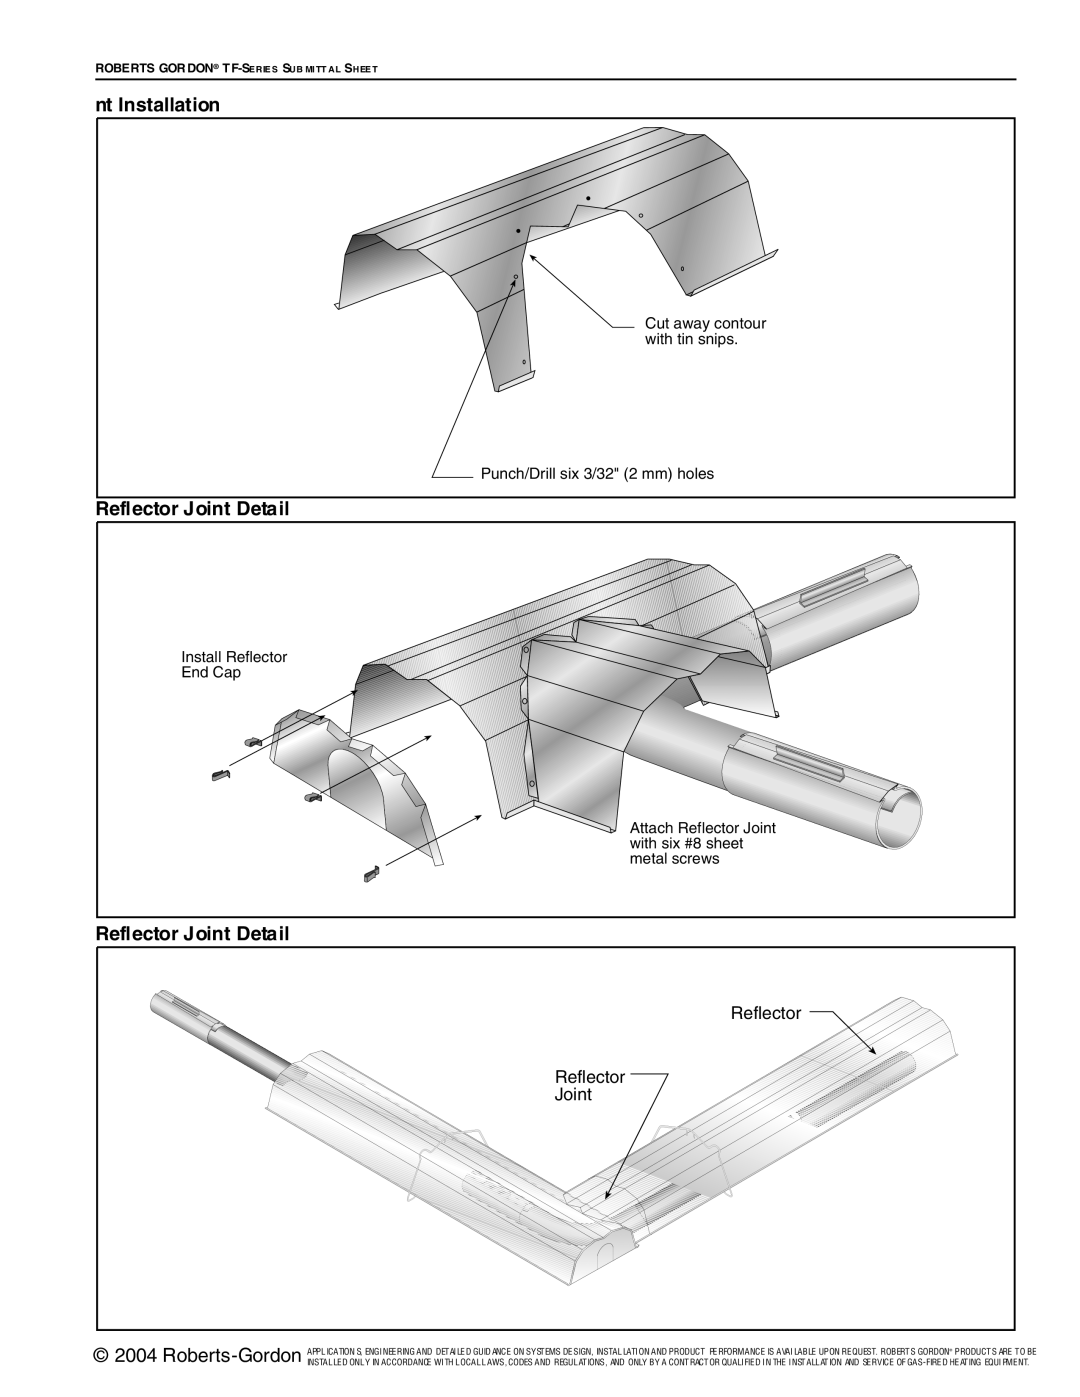 Roberts Gorden TF-Series service manual nt Installation, Reflector Joint Detail, Cut away contour with tin snips 